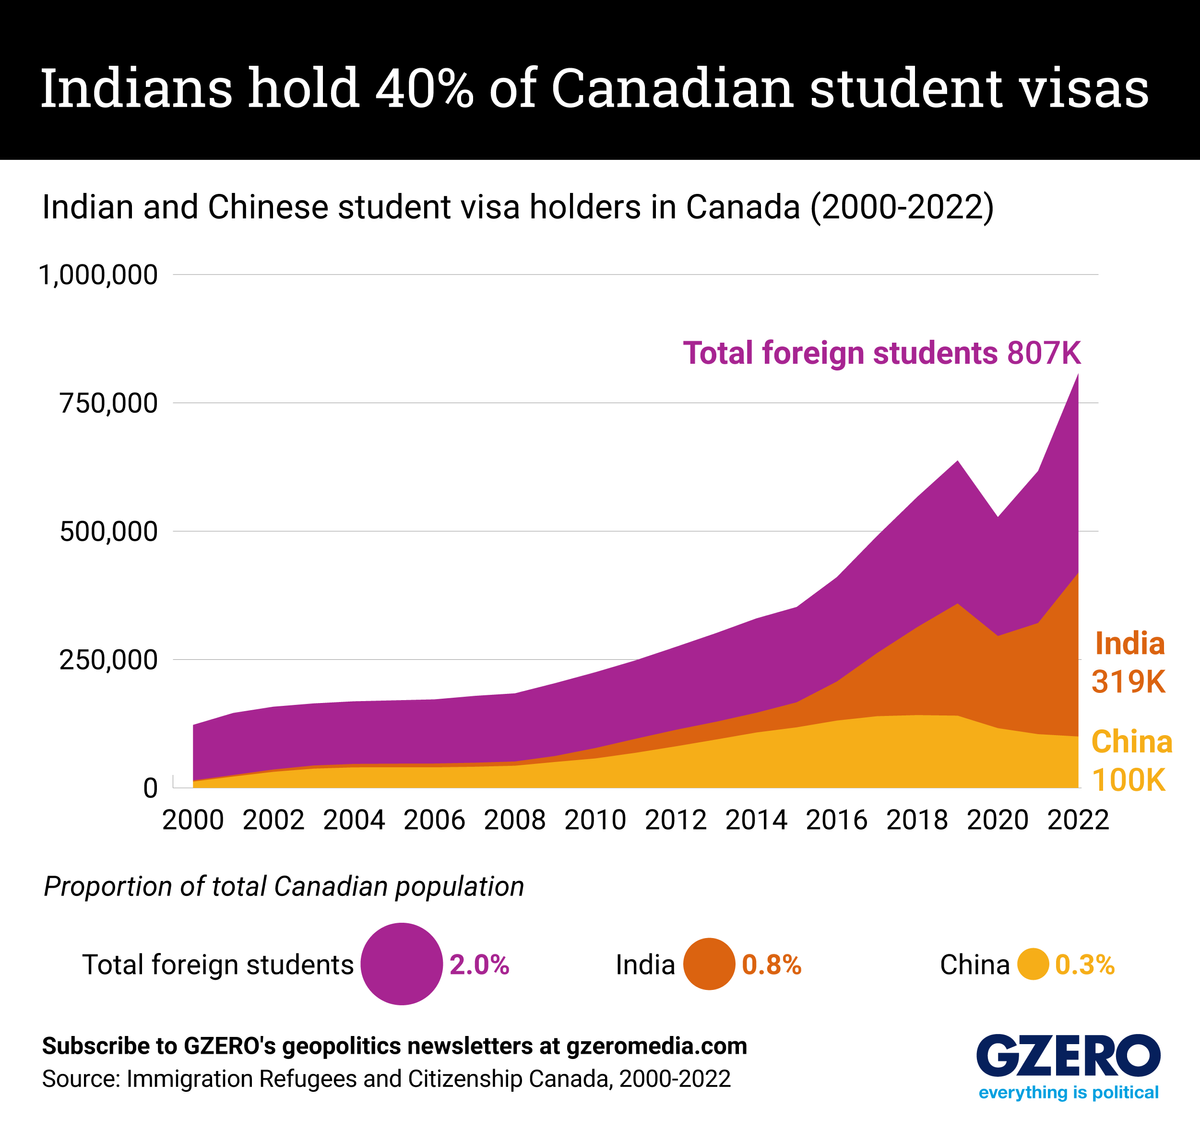 The Graphic Truth: Indians hold 40% of Canadian student visas